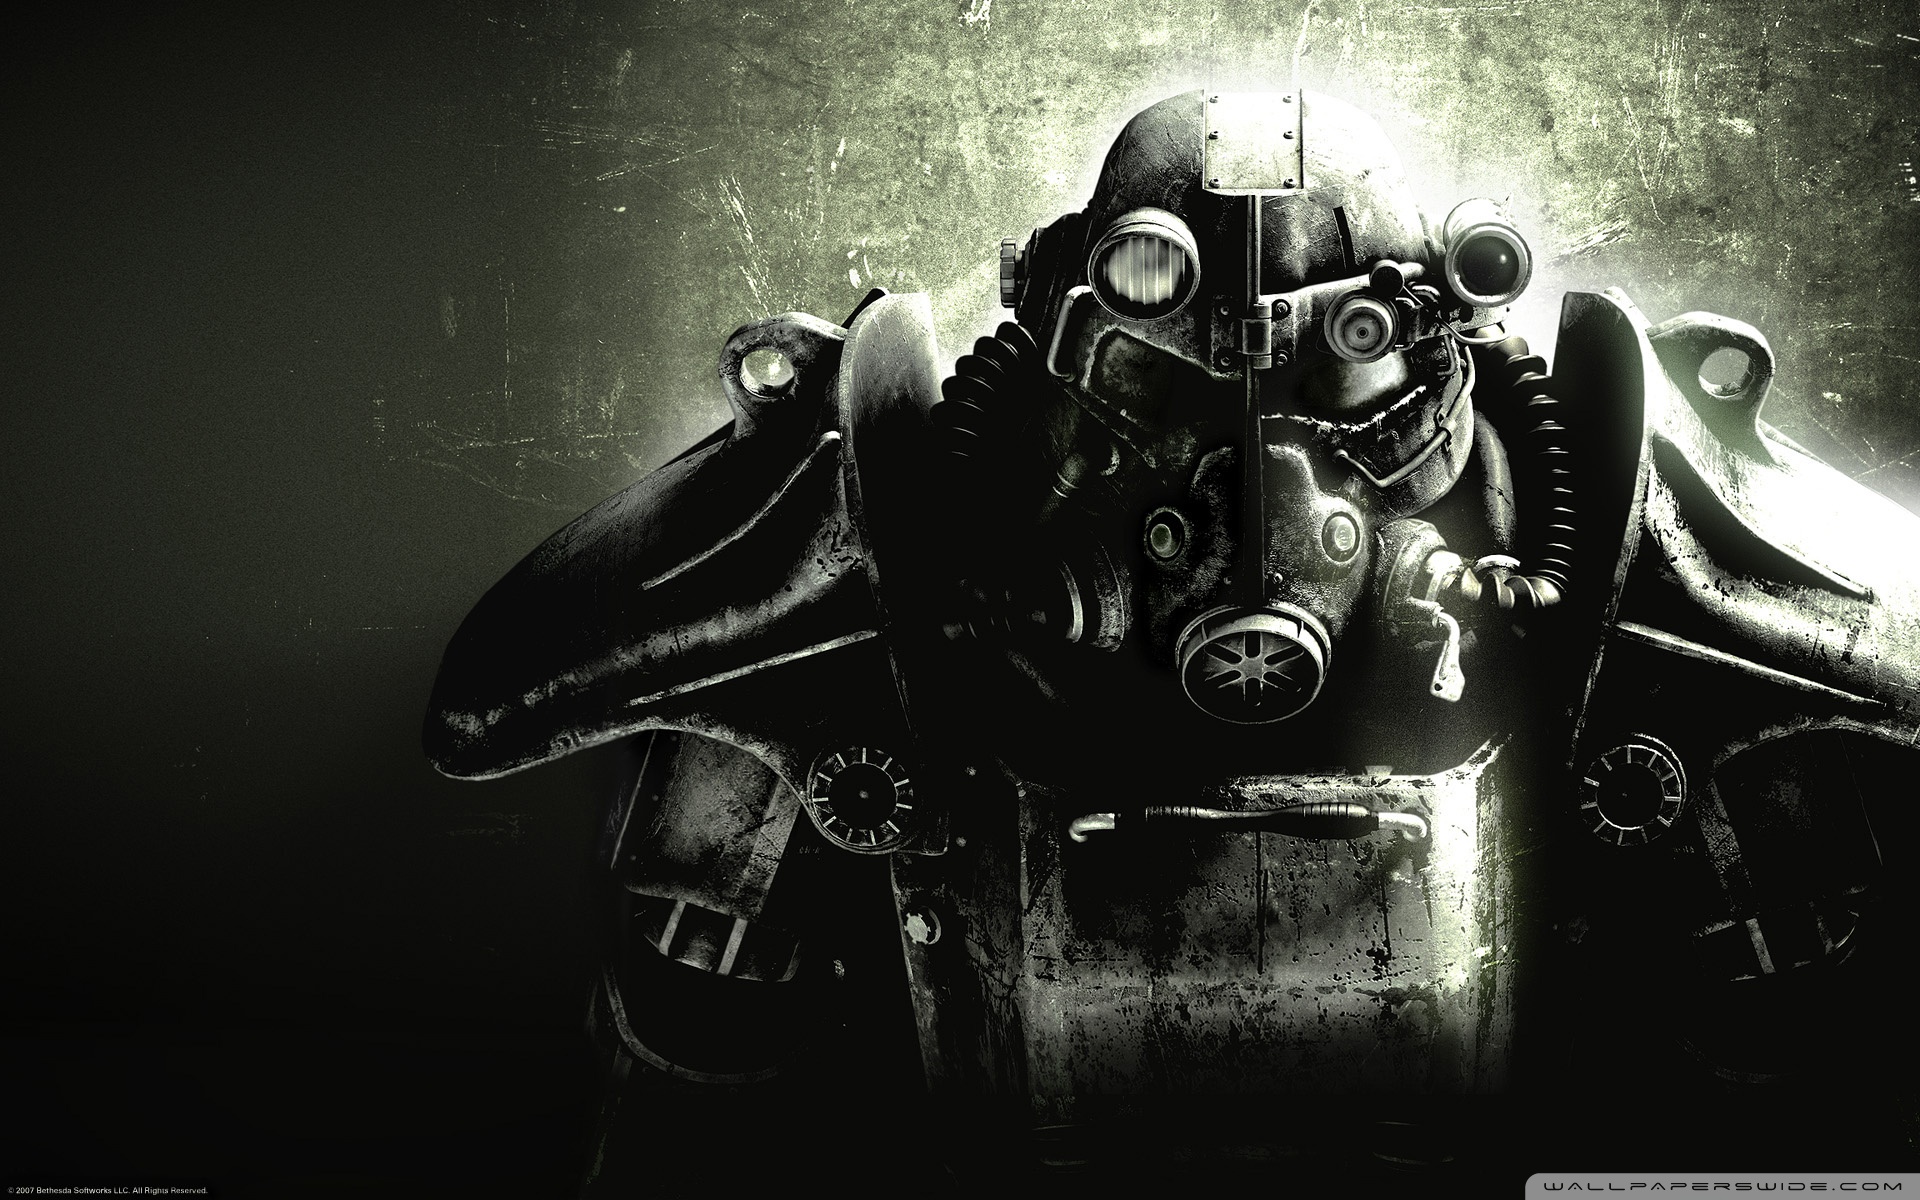 Wallpaperswide Com Fallout Ultra Hd Wallpapers For Uhd Widescreen Ultrawide Multi Display Desktop Tablet Smartphone Page 1